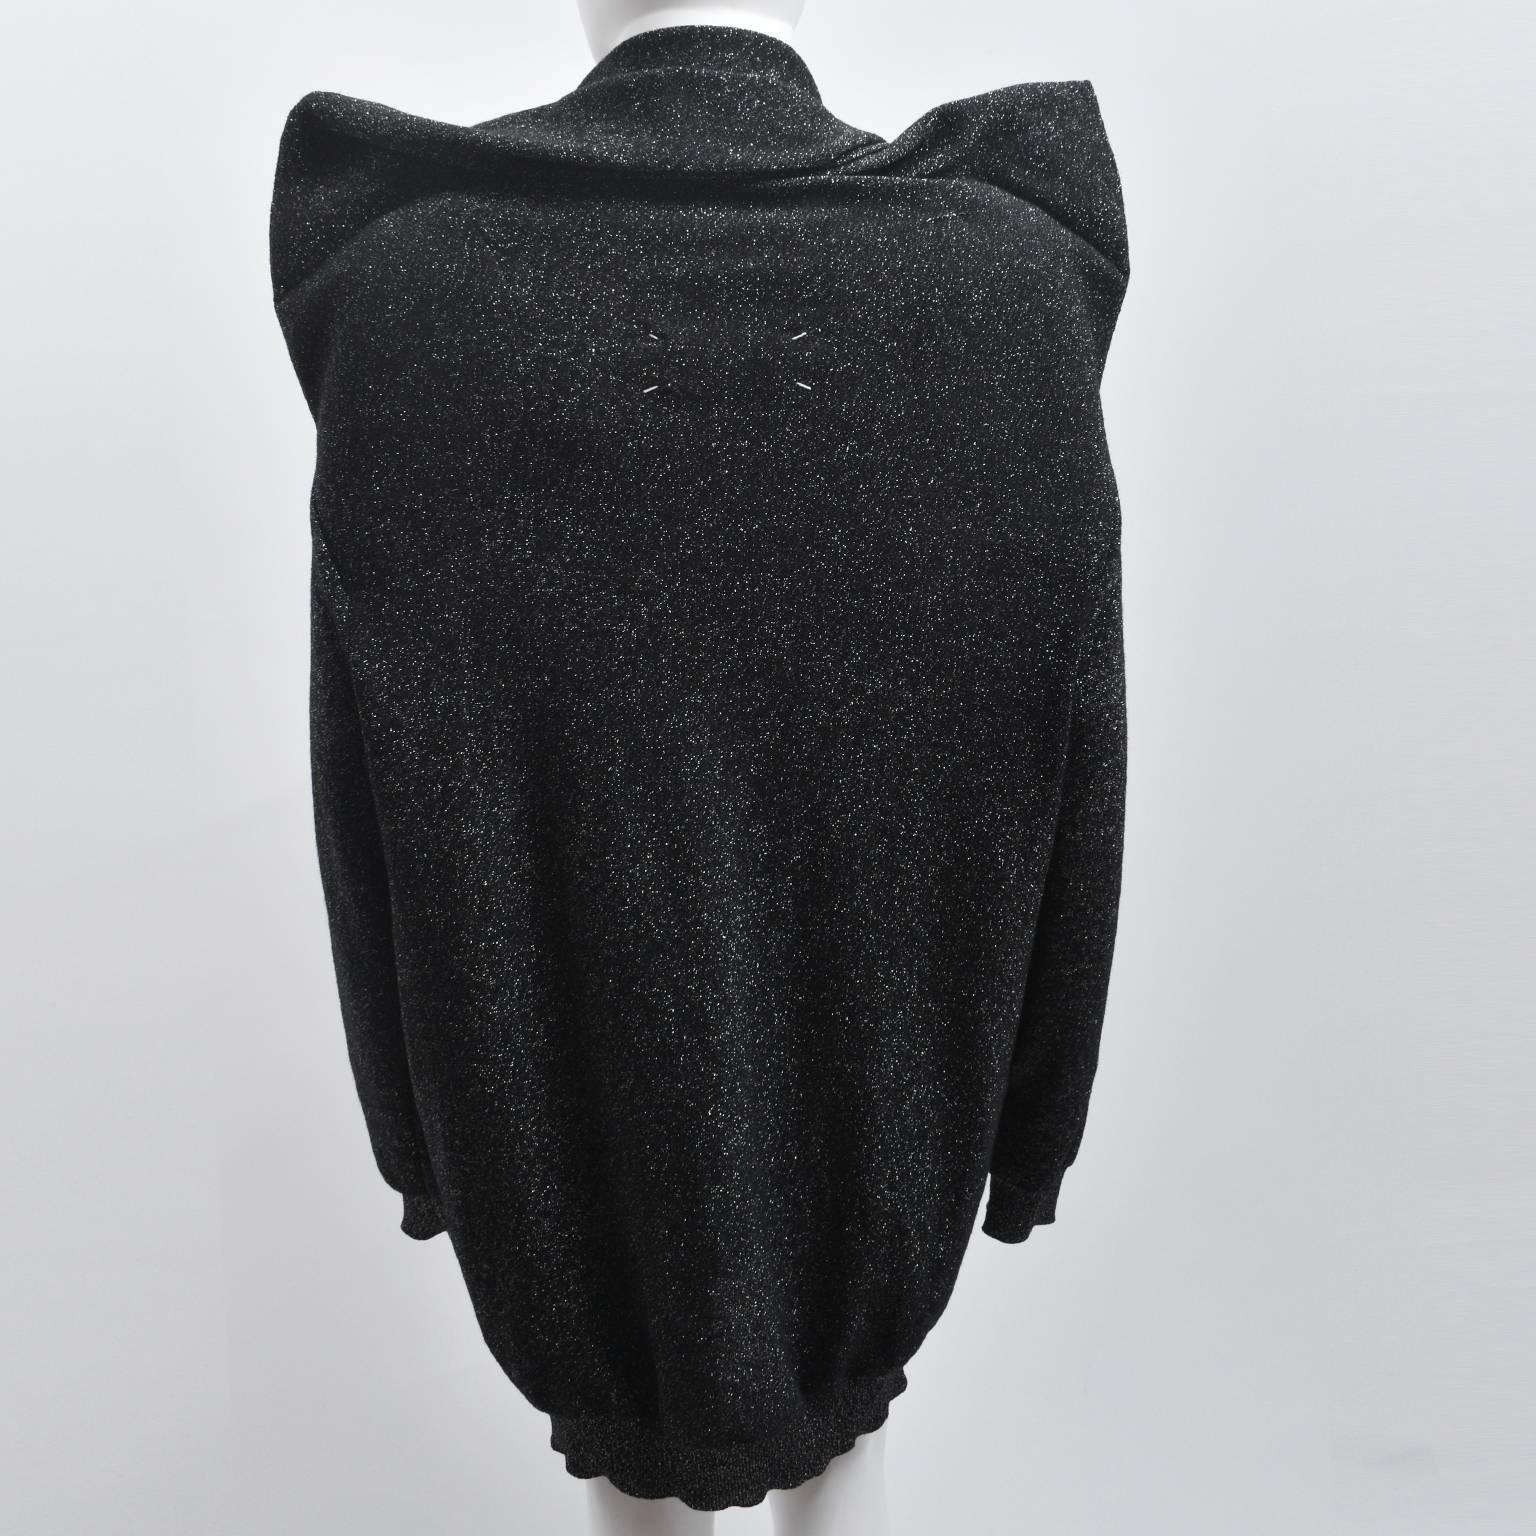 Maison Martin Margiela Black and Silver Glitter Knit with Exaggerated Shoulders For Sale 2